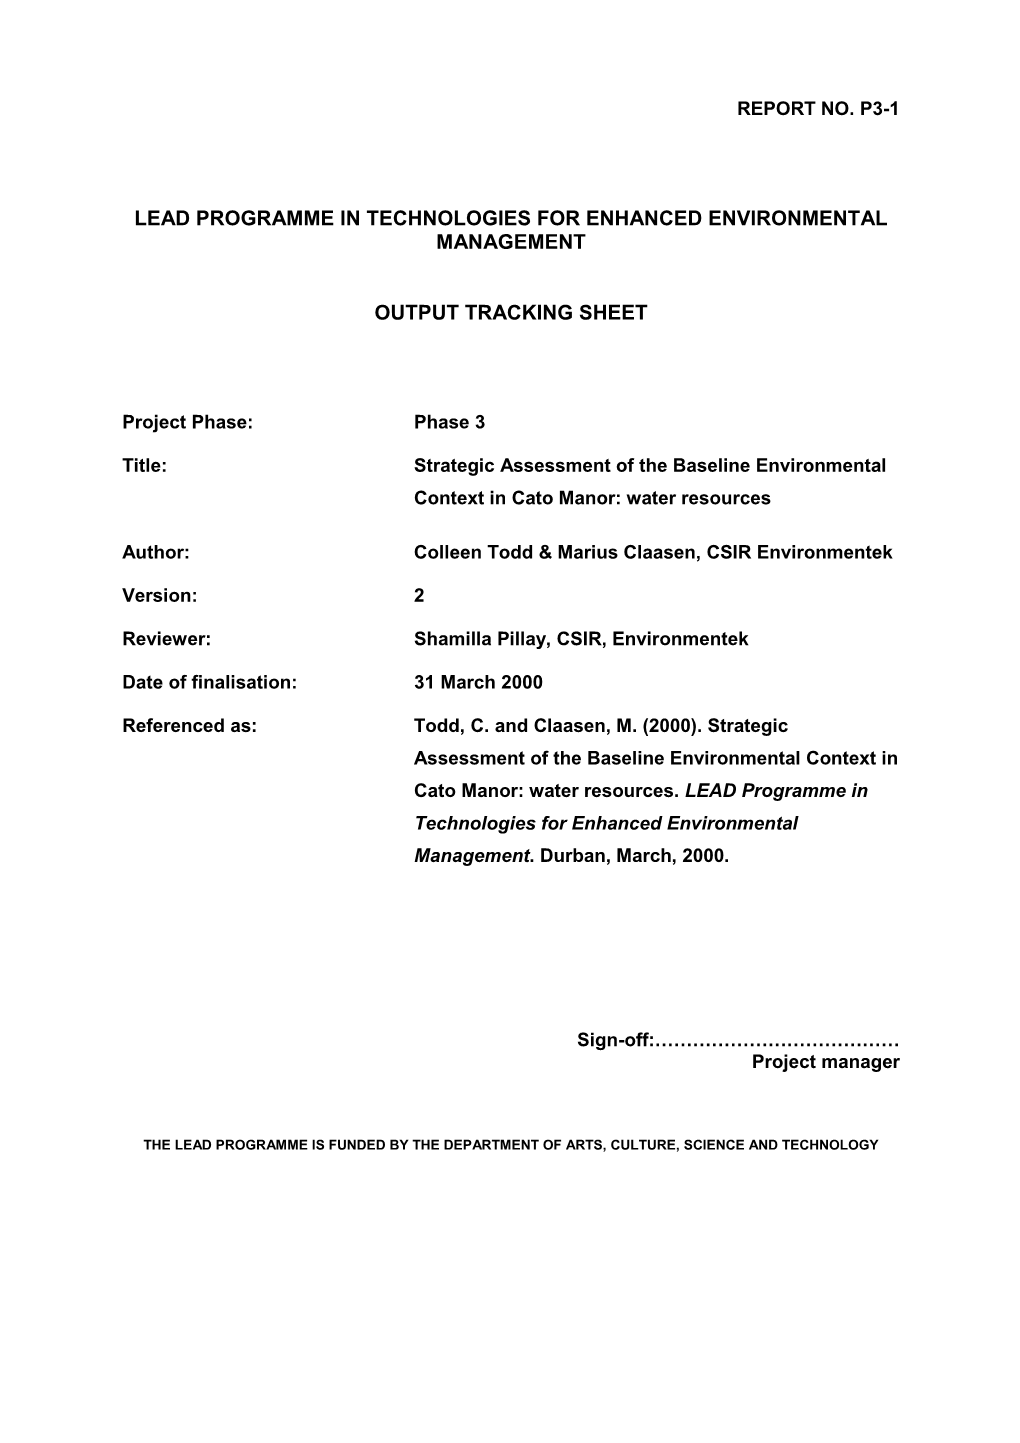 Lead Programme in Technologies for Enhanced Environmental Management